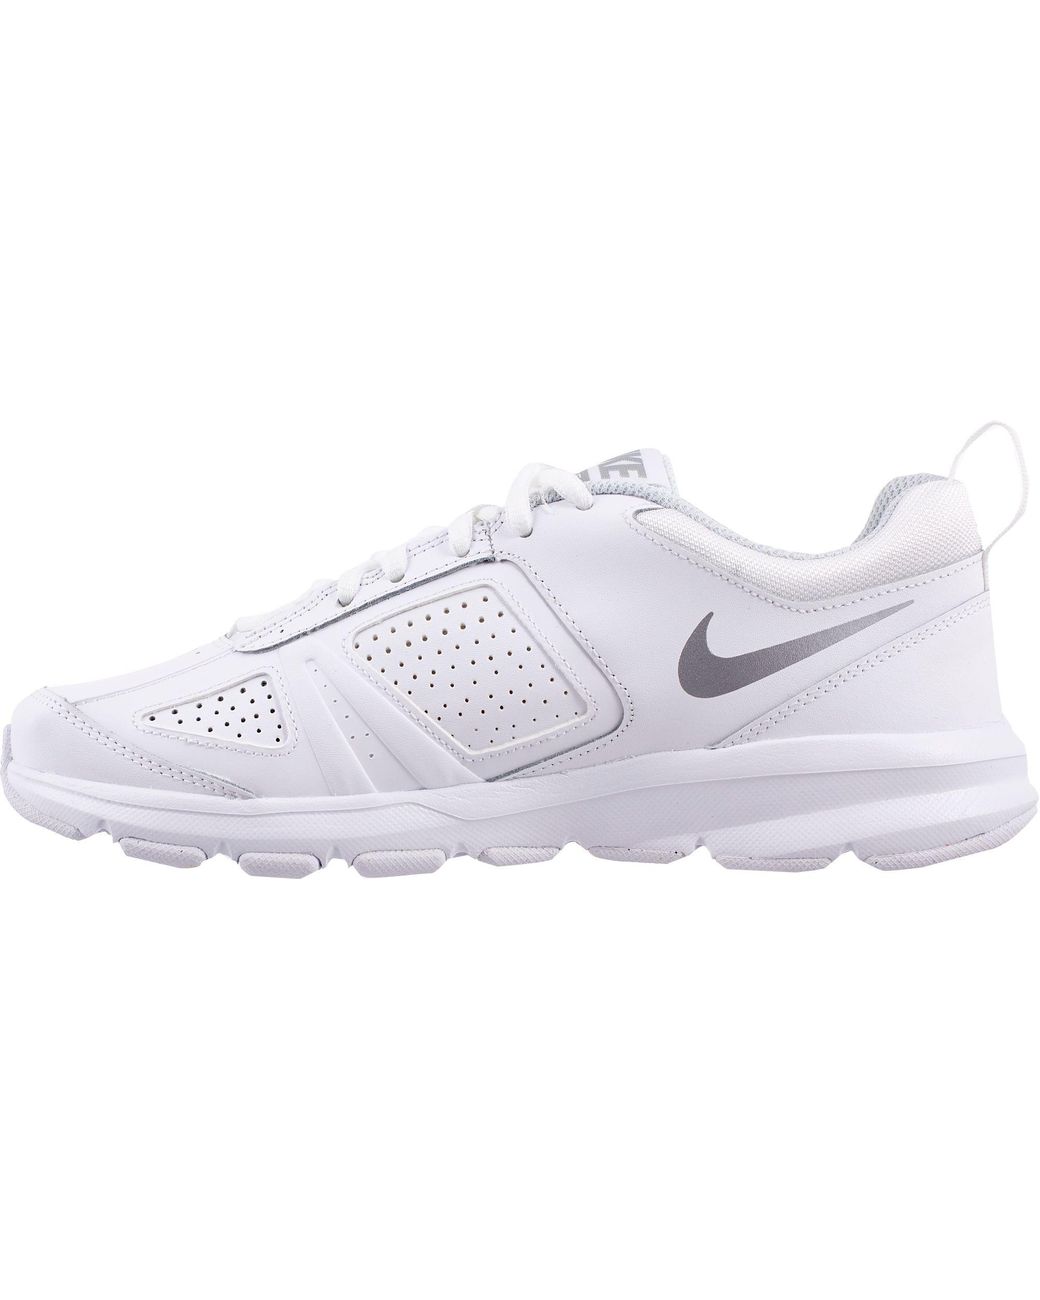 Nike Leather T-lite Xi Training Shoes in White/Grey (White) | Lyst